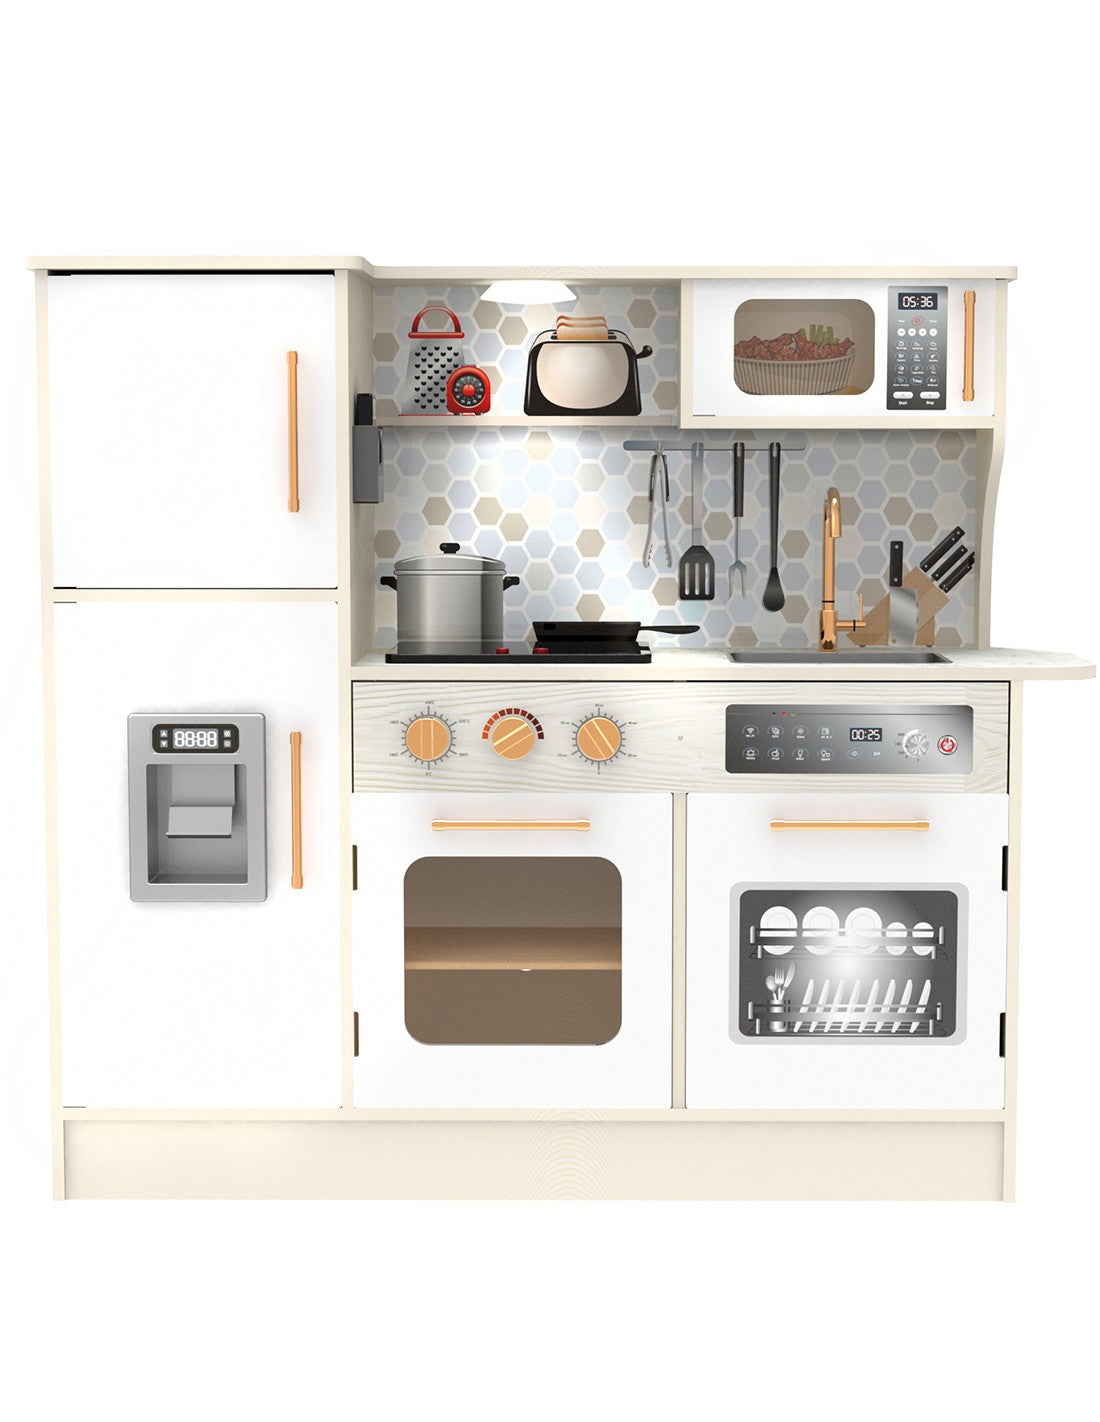 Big wooden kitchen to play, white - MoonyBoon